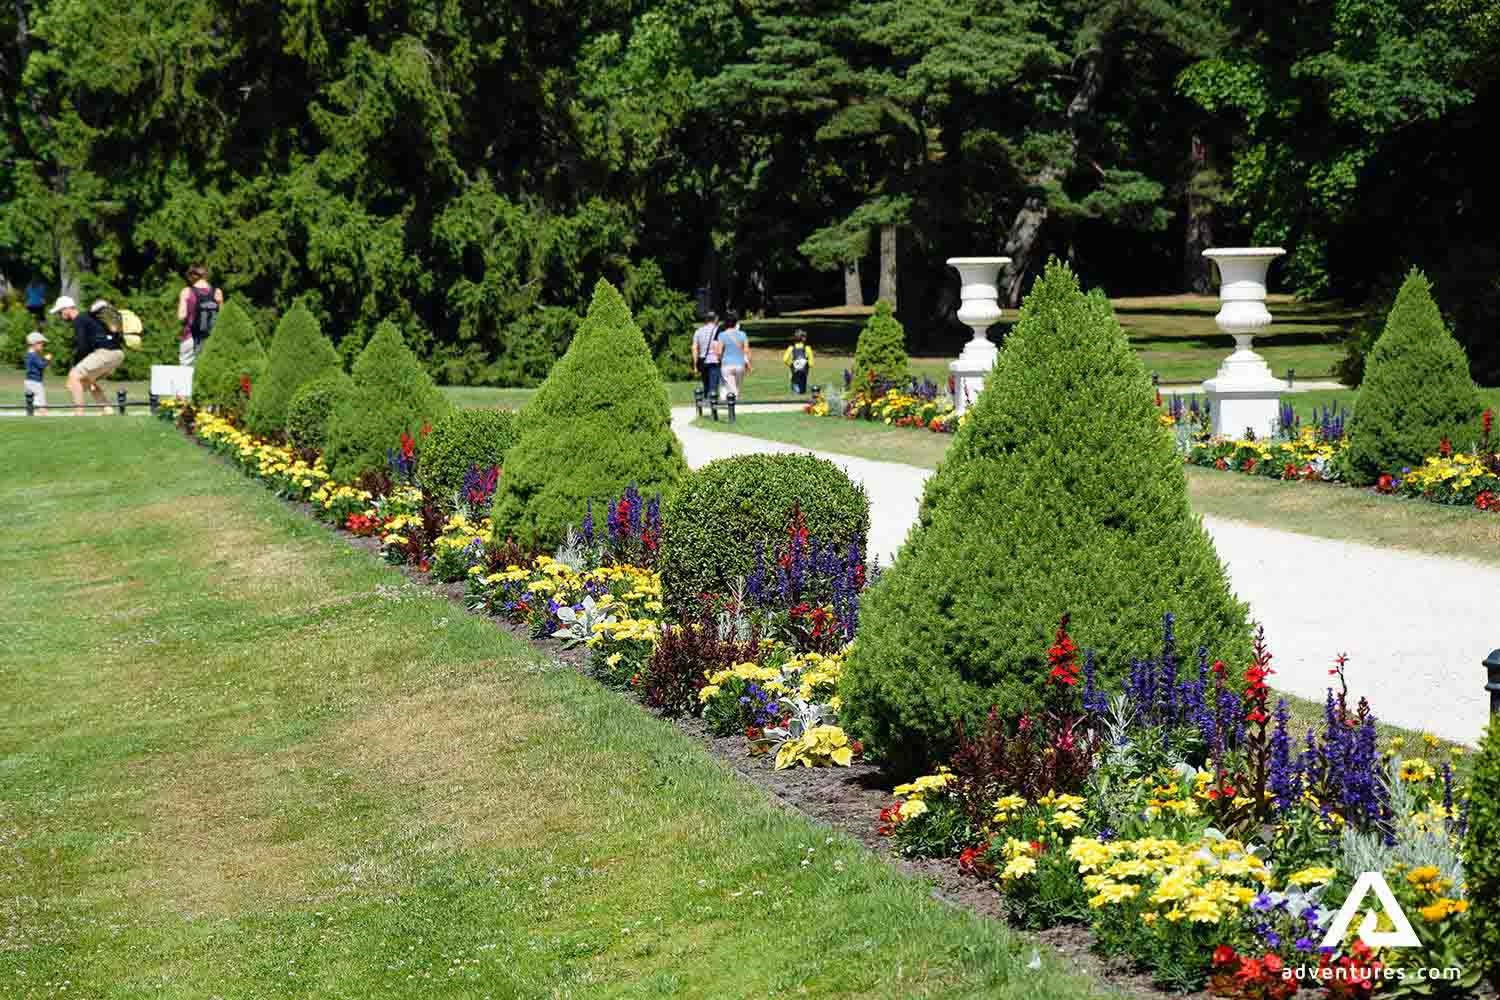 birute hill park in palanga at summer with flowers